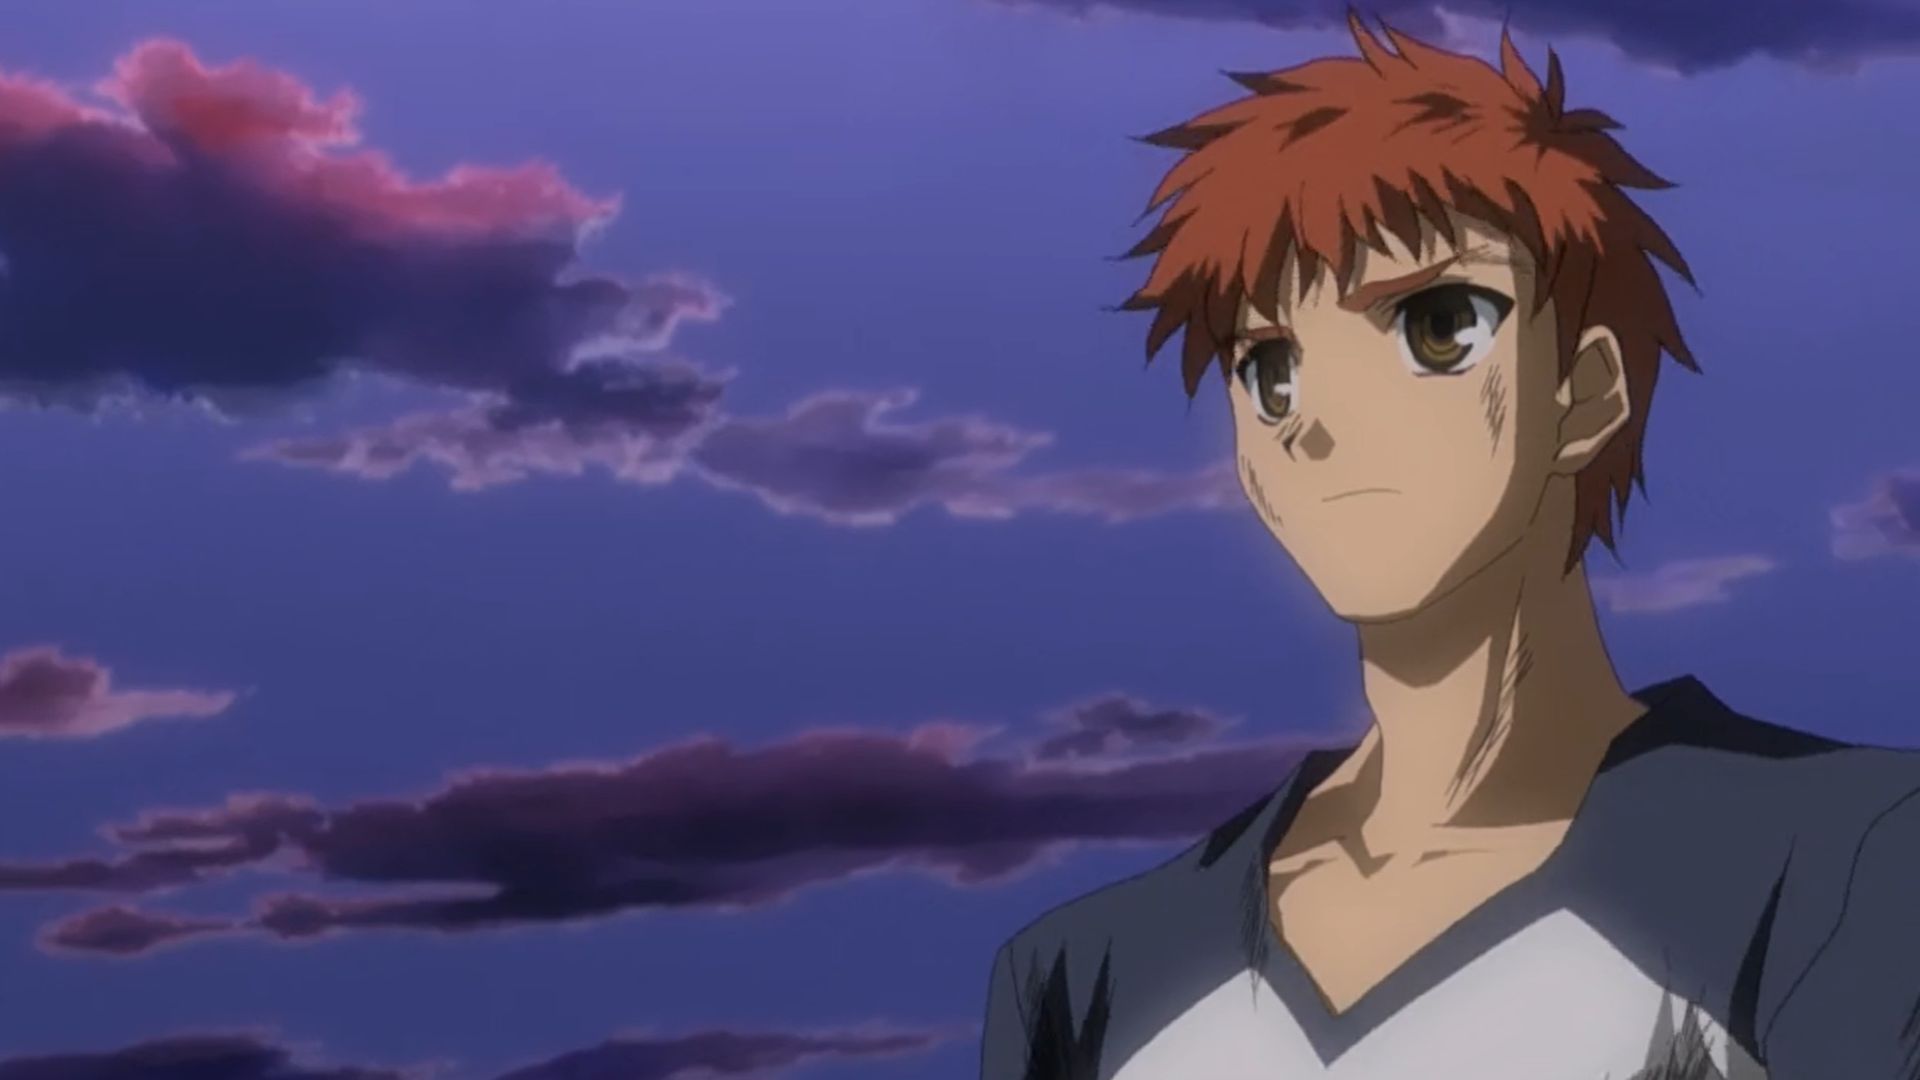 Archer from Fate/Stay Night is one of the top sad anime boys. 